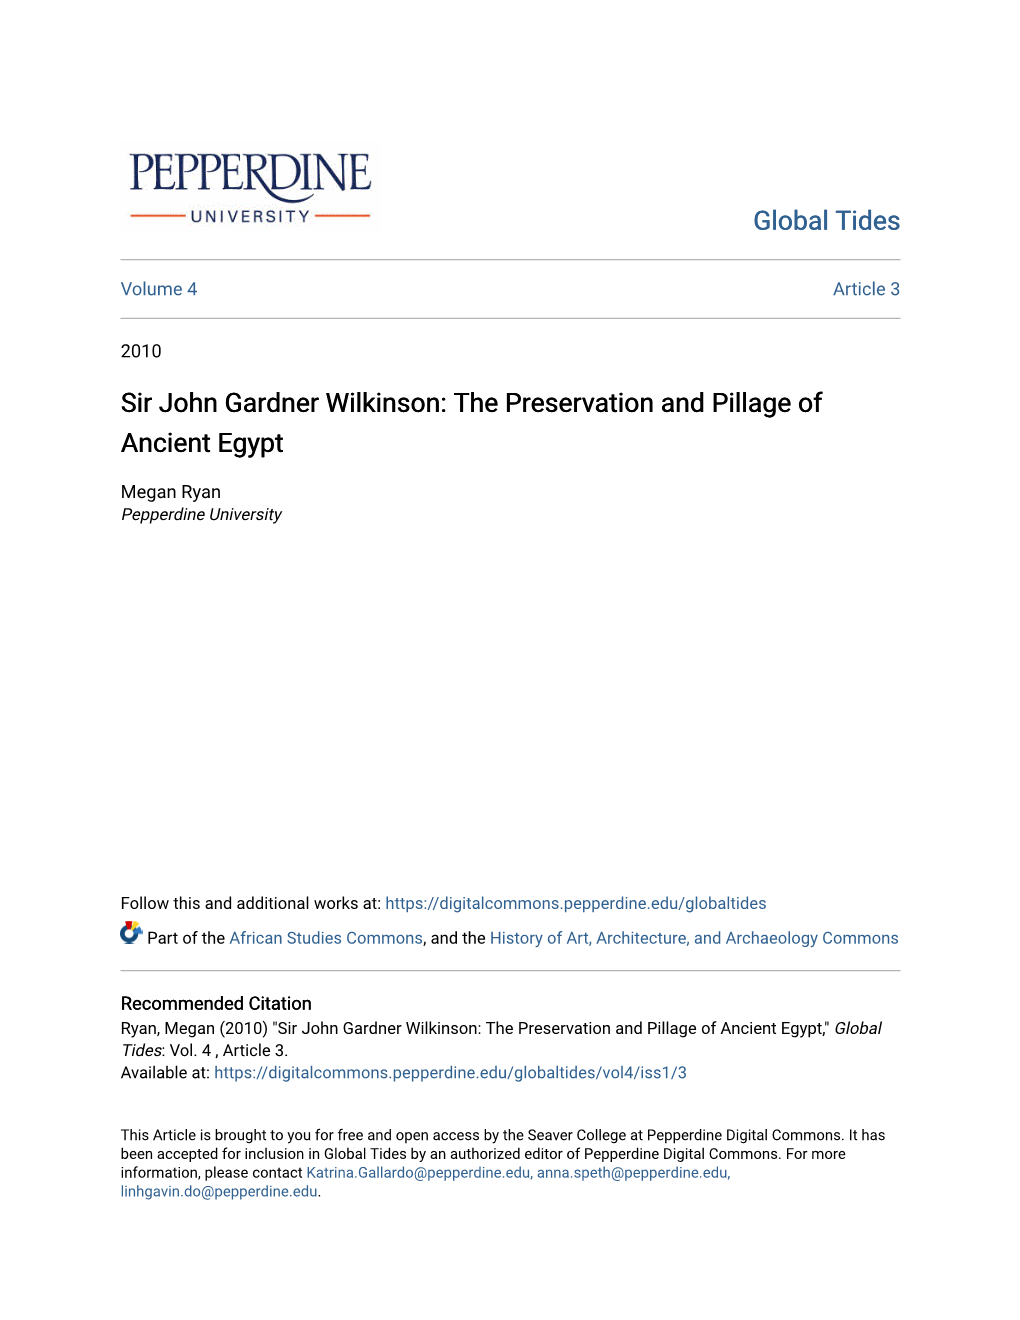 Sir John Gardner Wilkinson: the Preservation and Pillage of Ancient Egypt